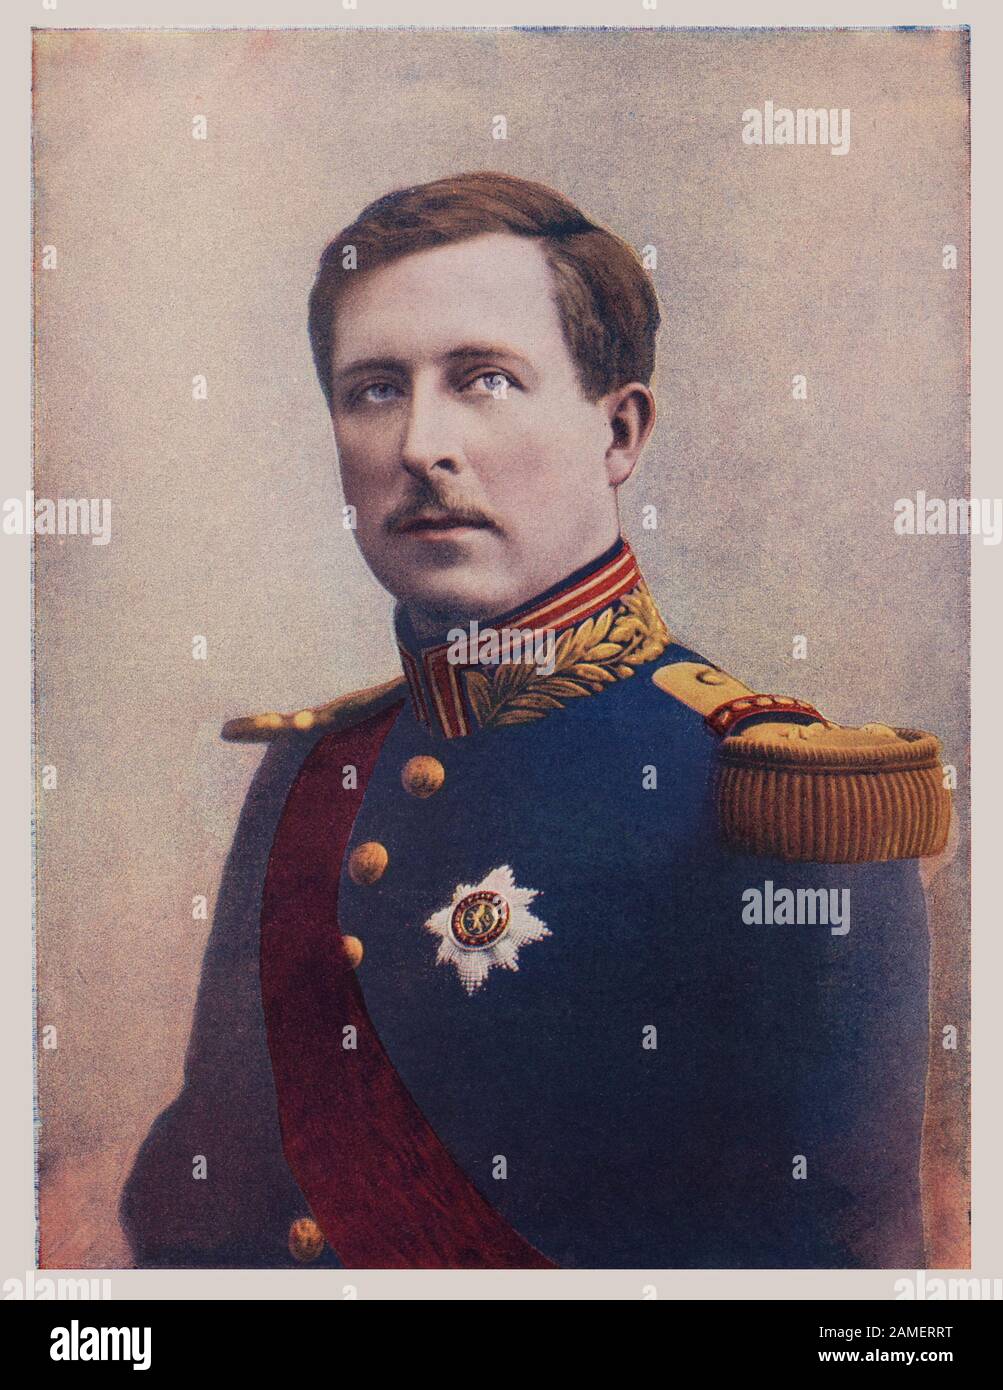 Albert I (1875 – 1934) reigned as King of the Belgians from 1909 to 1934. This was an eventful period in the history of Belgium, which included the pe Stock Photo